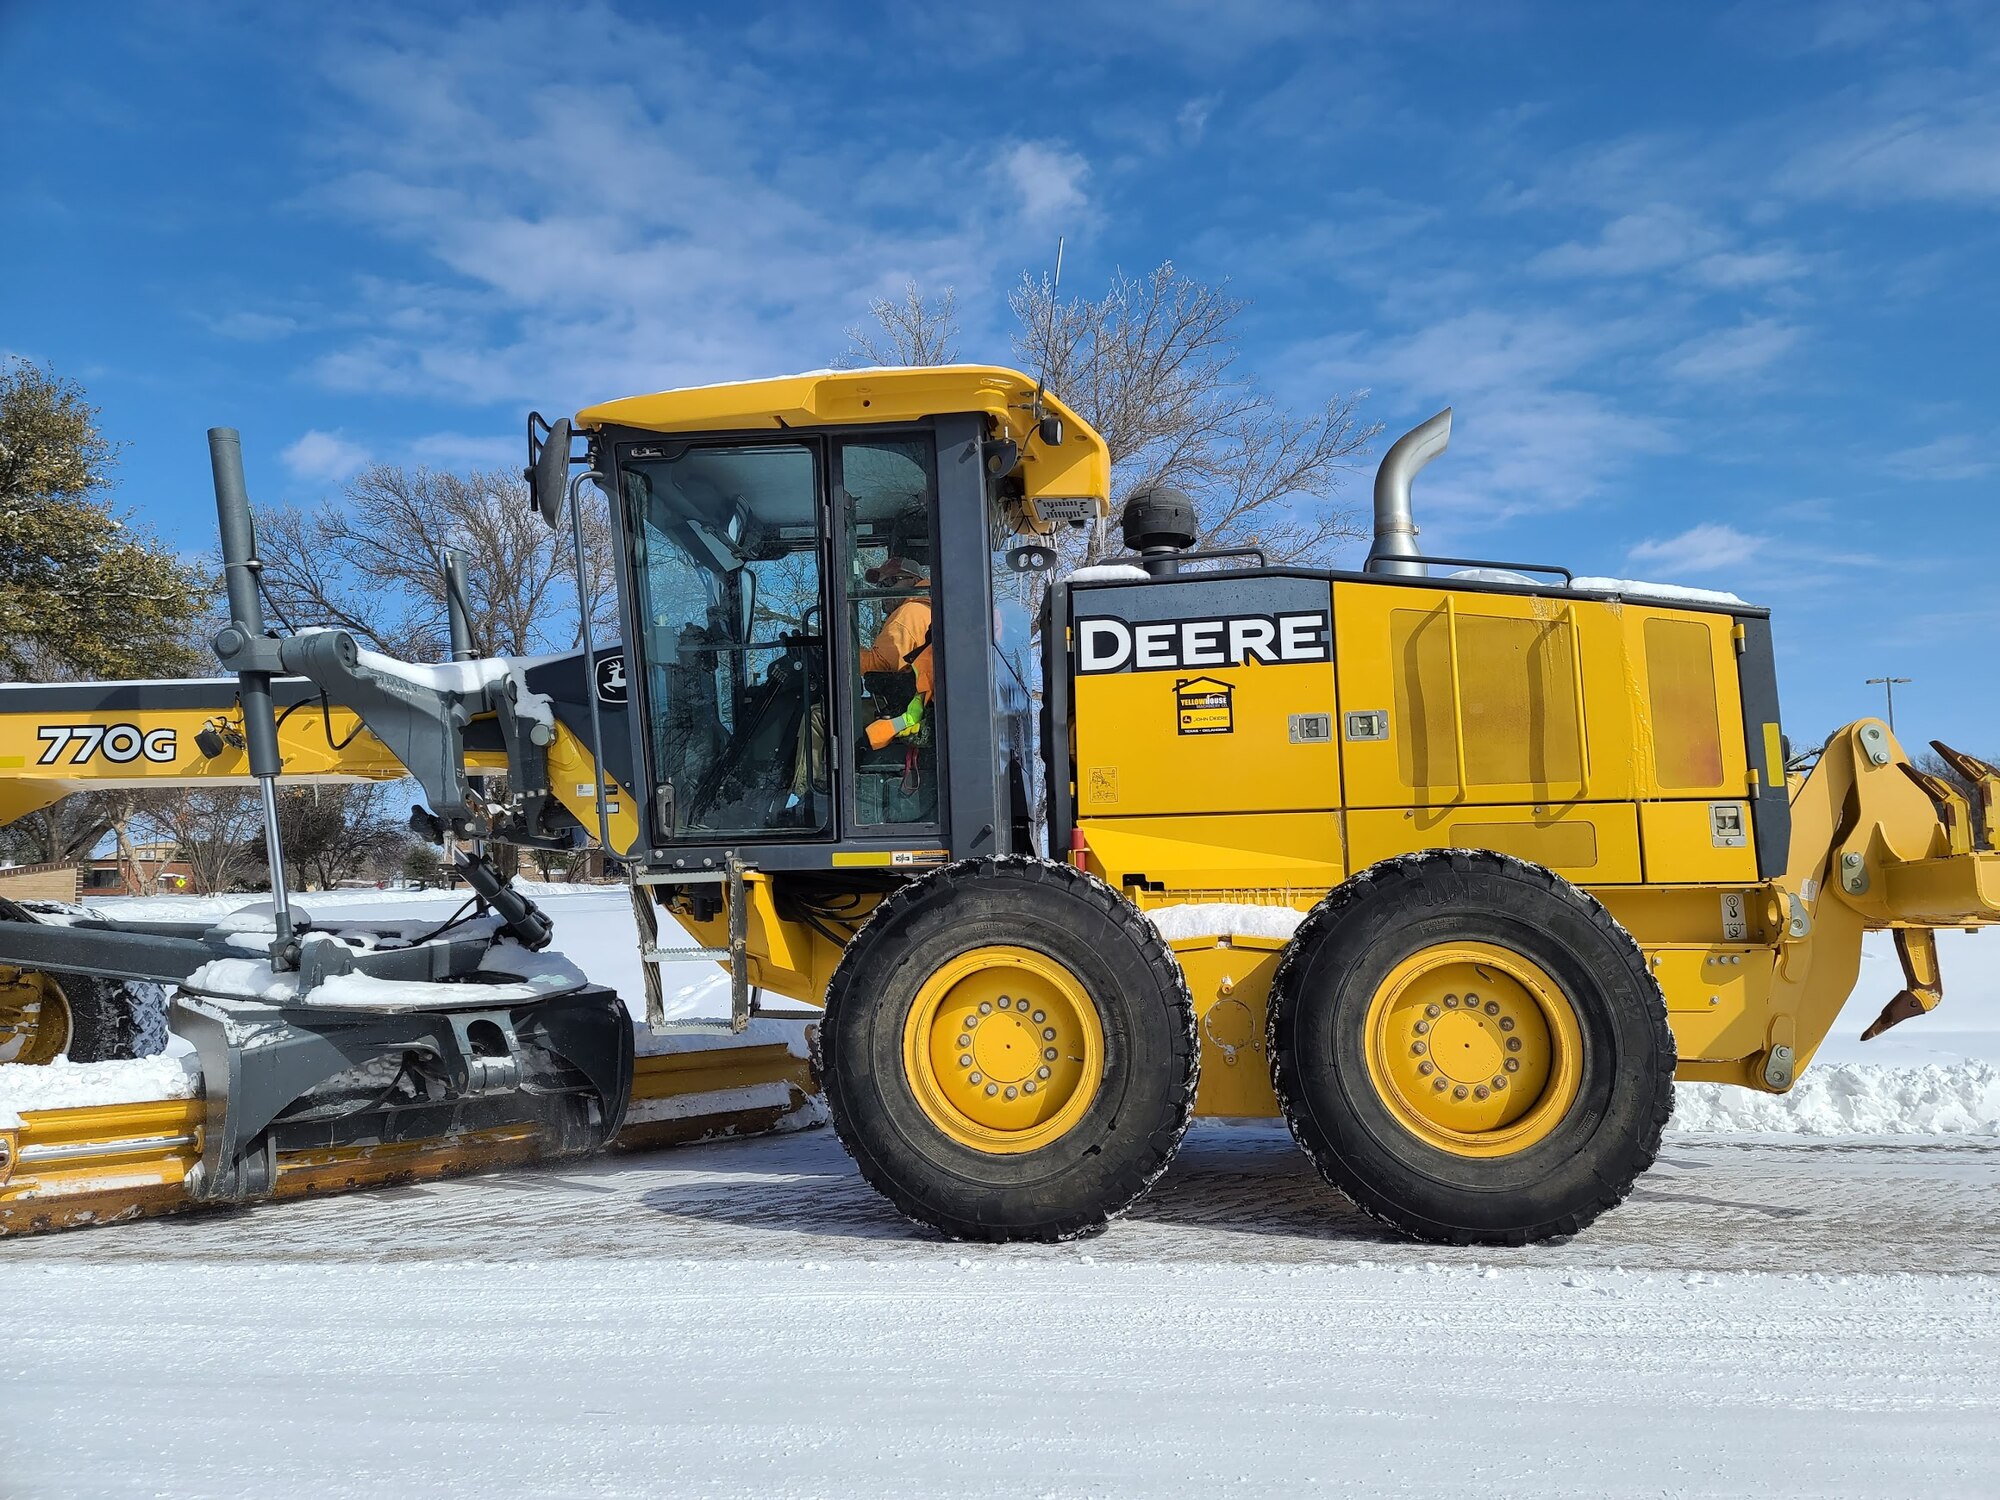 A member of the snow removal team plows the troop walk on Goodfellow Air Force Base, Texas, Feb. 15, 2021. The base rented a grader from downtown to remove the snow from roads across the installation. (U.S. Air Force photo by Airman 1st Class Michael Bowman)